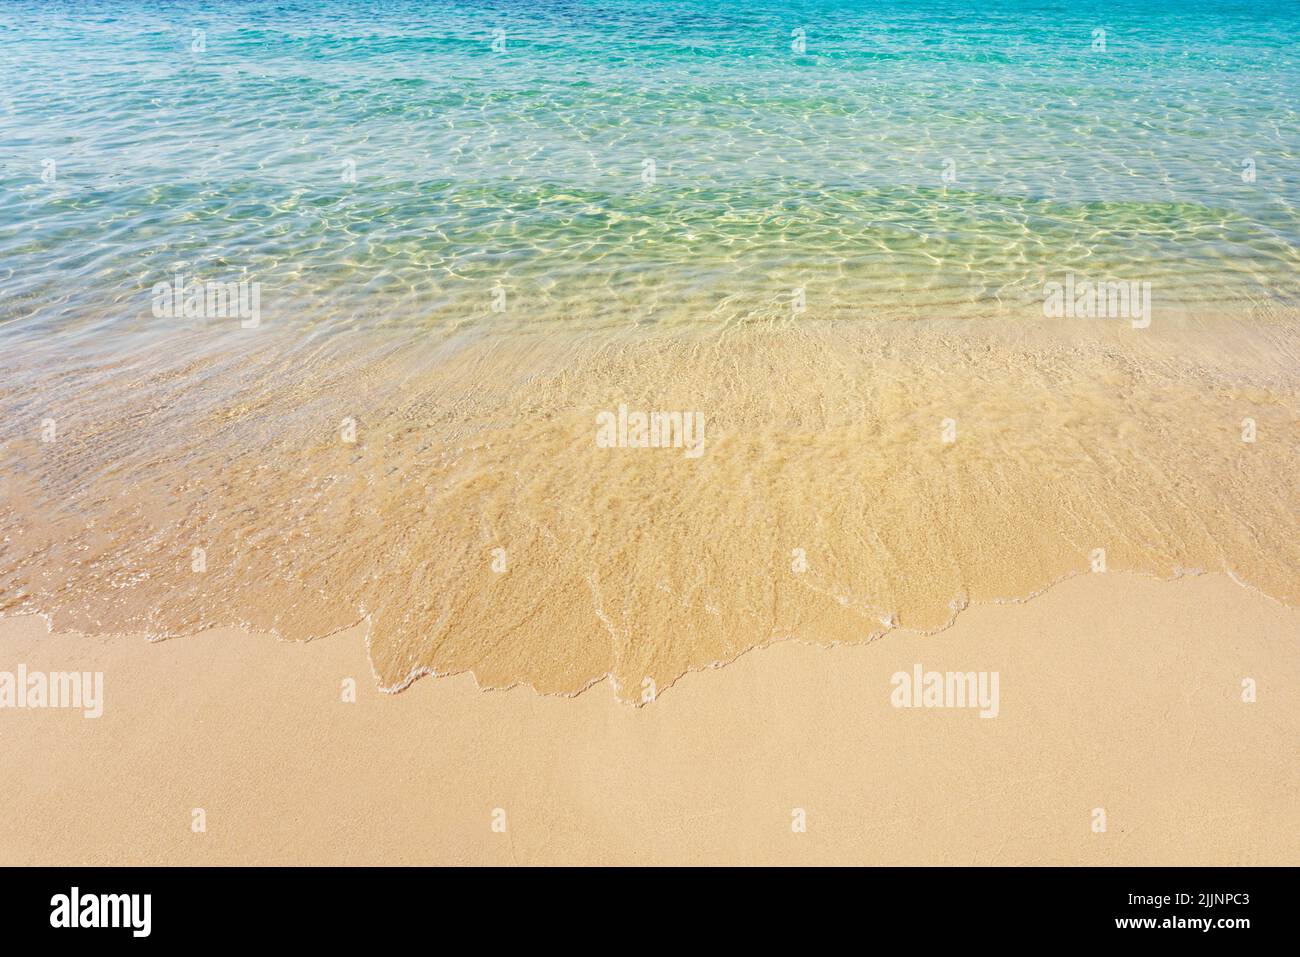 View of wave on the beach, Corsica Stock Photo